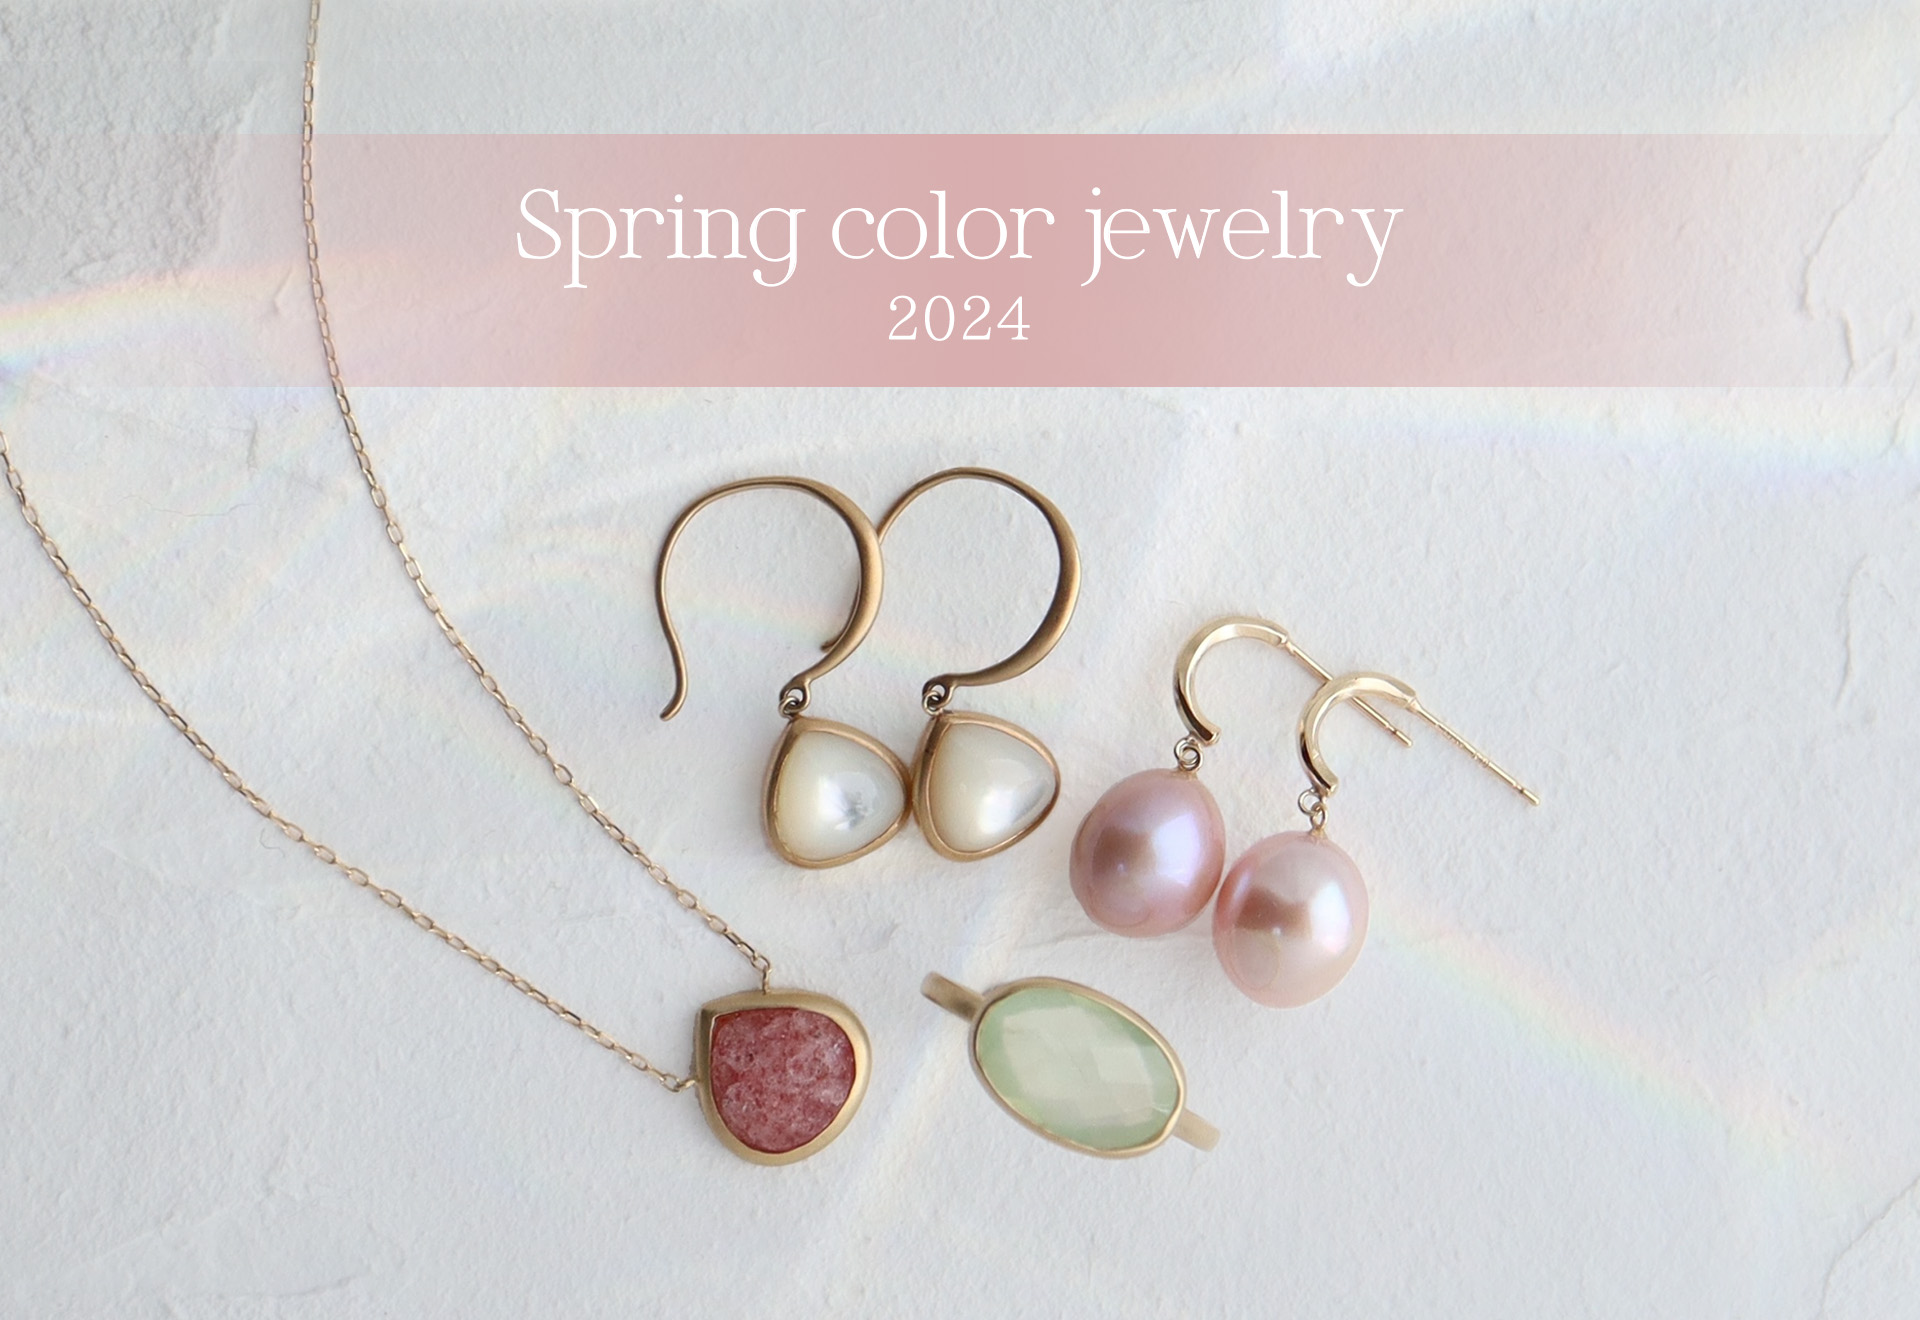 Spring color jewelry